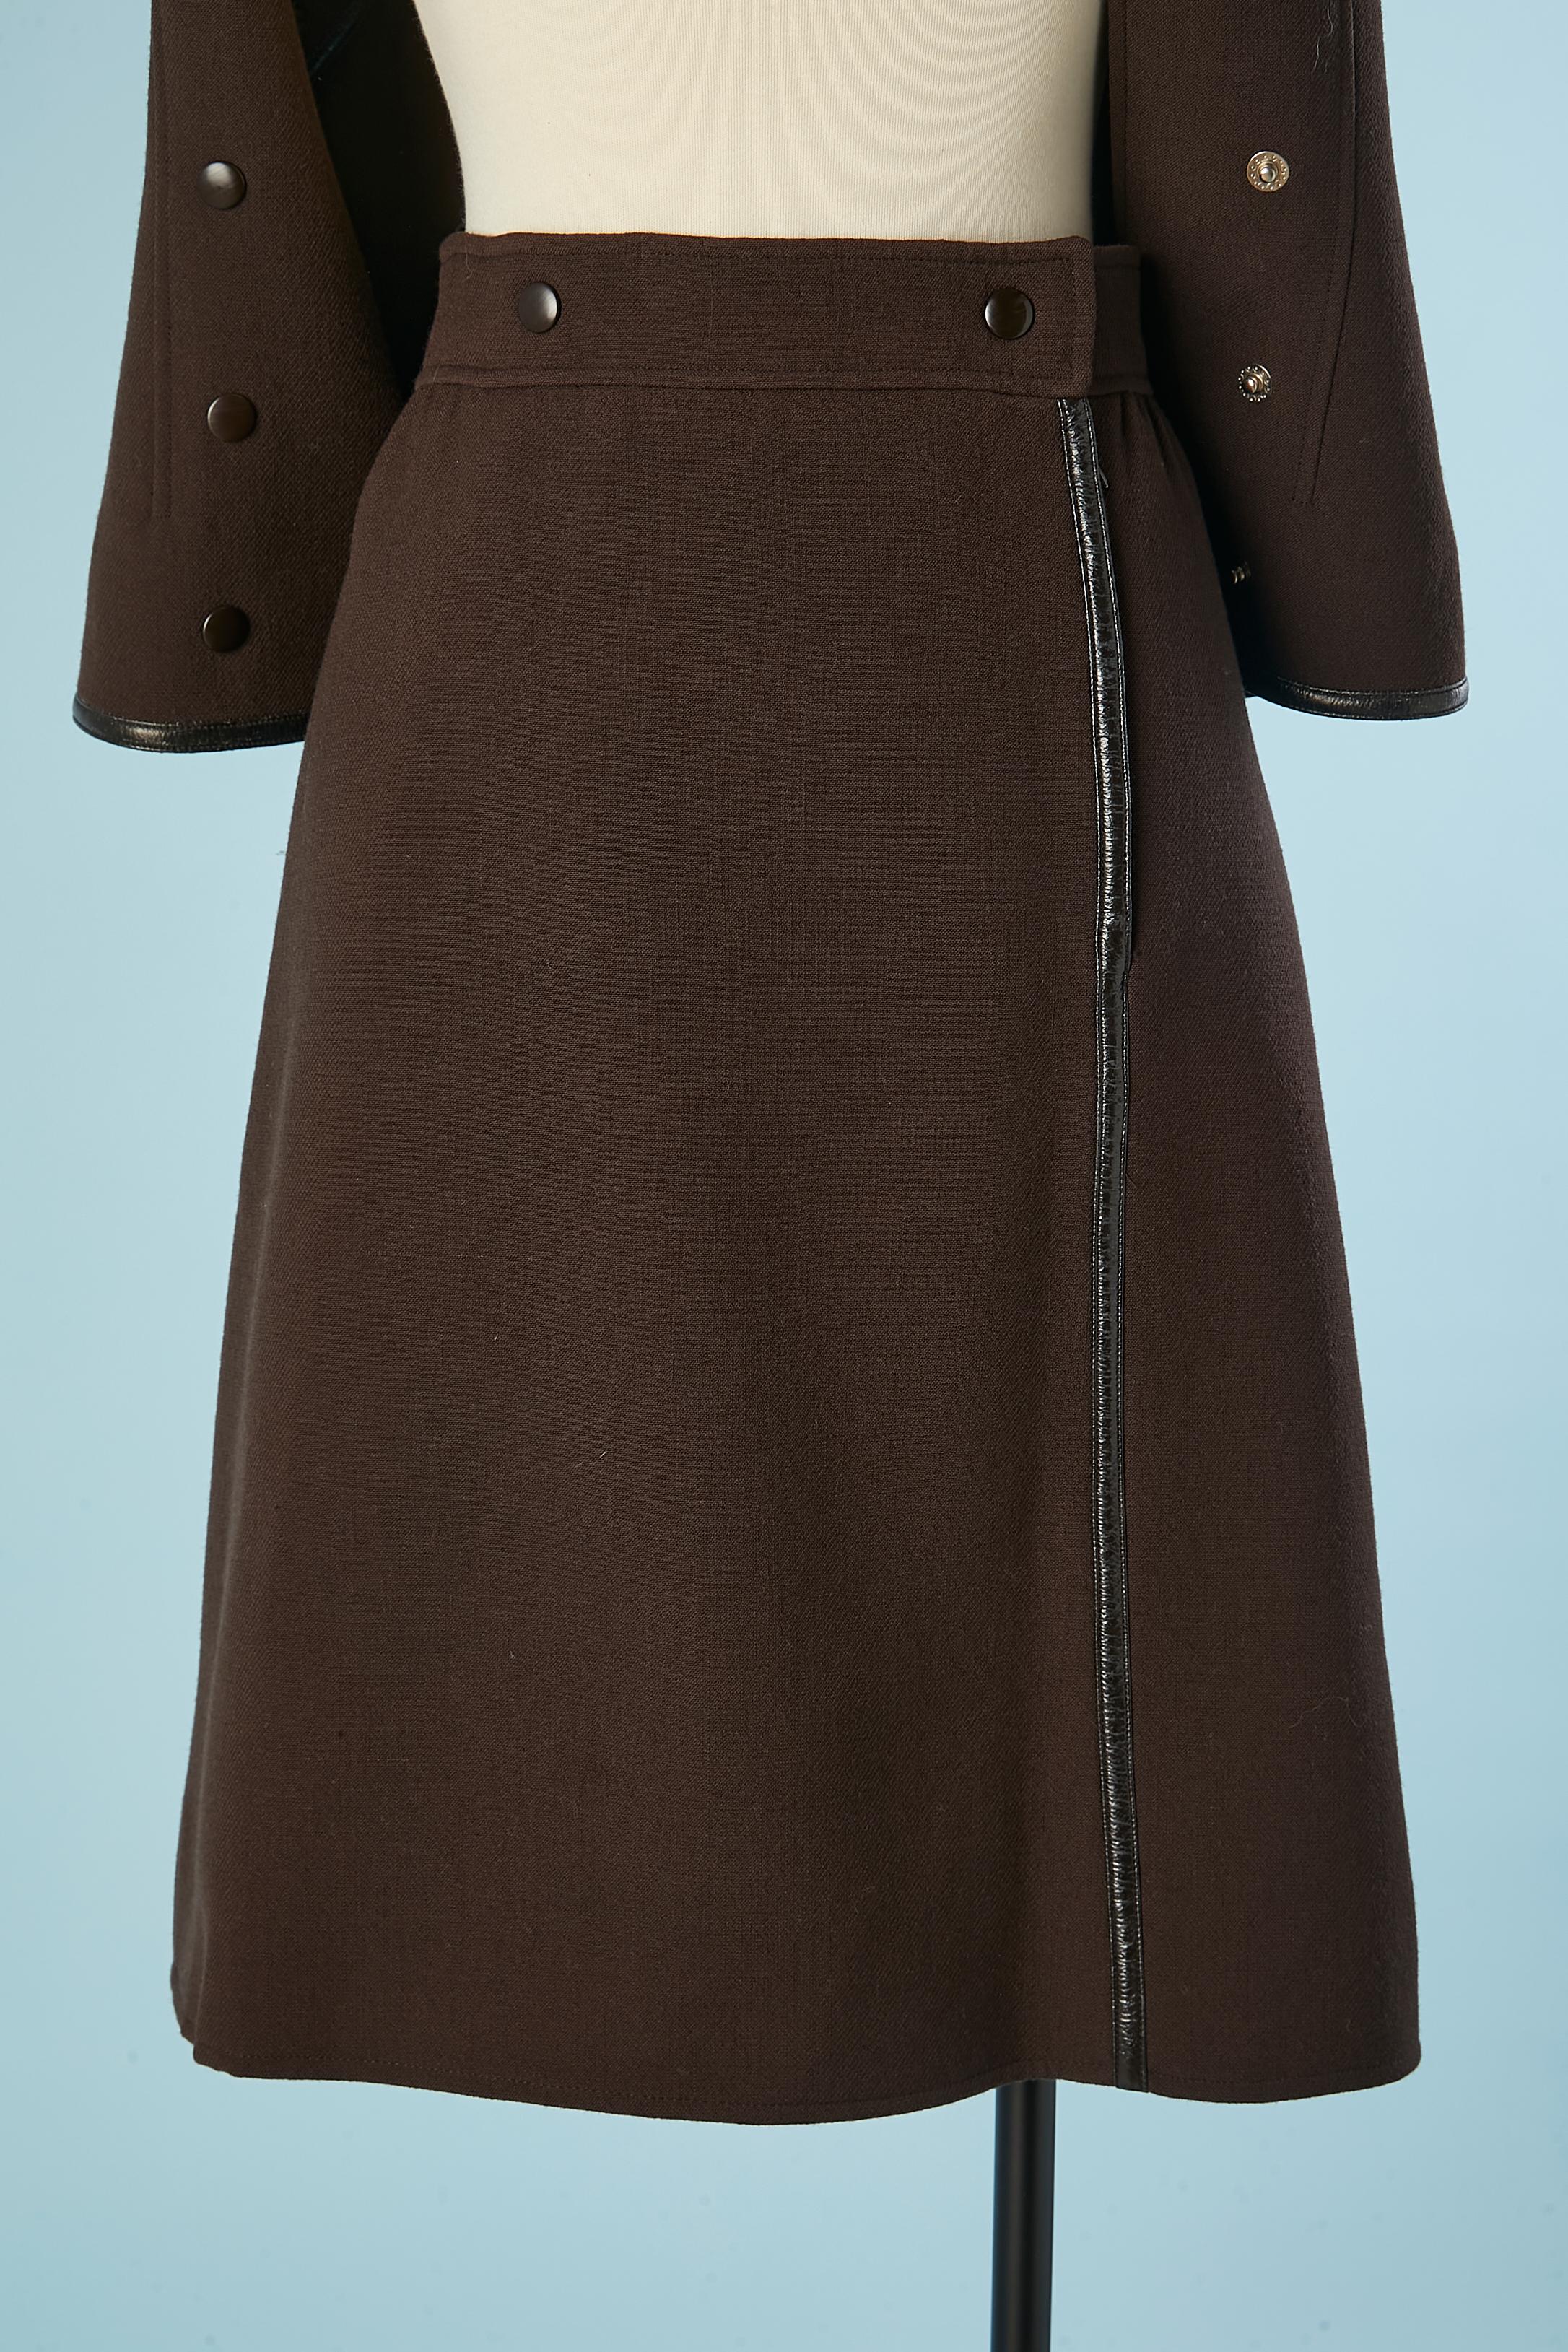 Brown wool skirt-suit and black piping Courrèges Paris Couture Future Circa 1970 For Sale 1